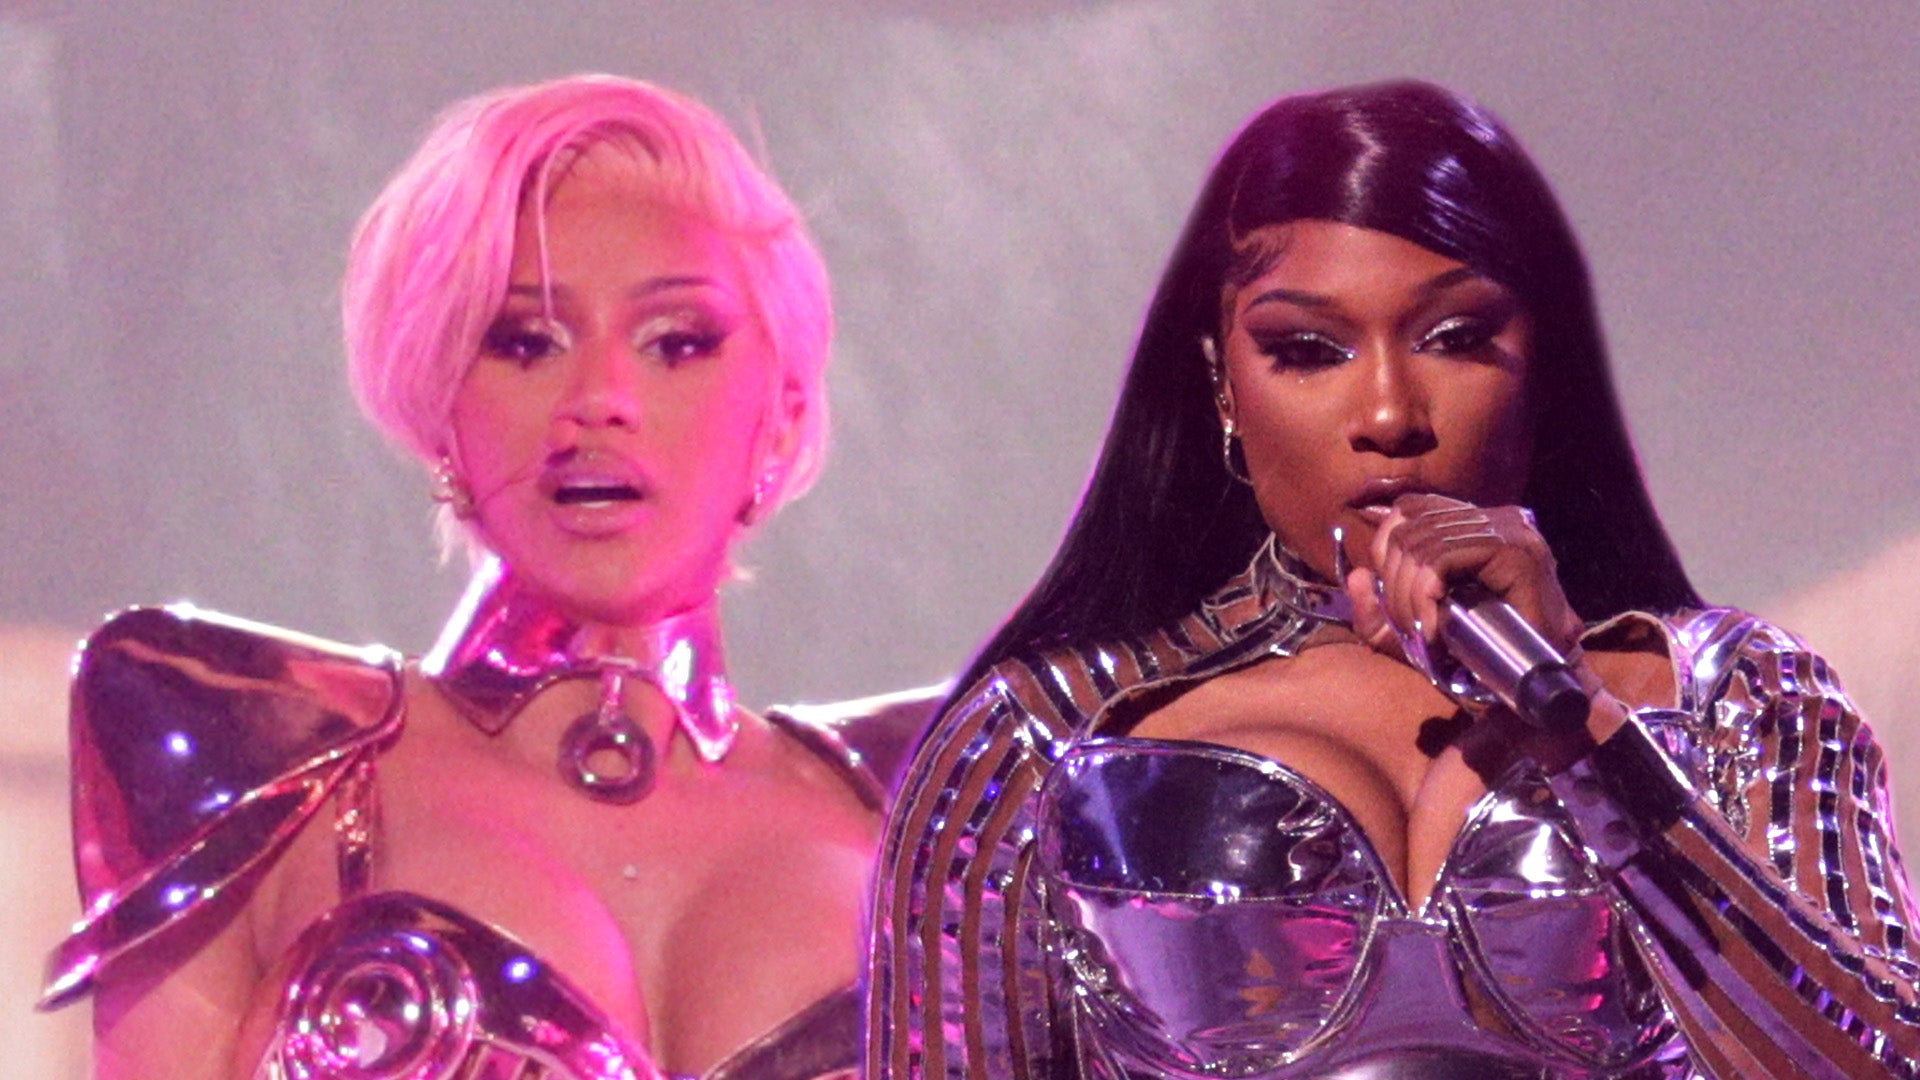 Cardi B and Megan Thee Stallion's WAP should be celebrated, not